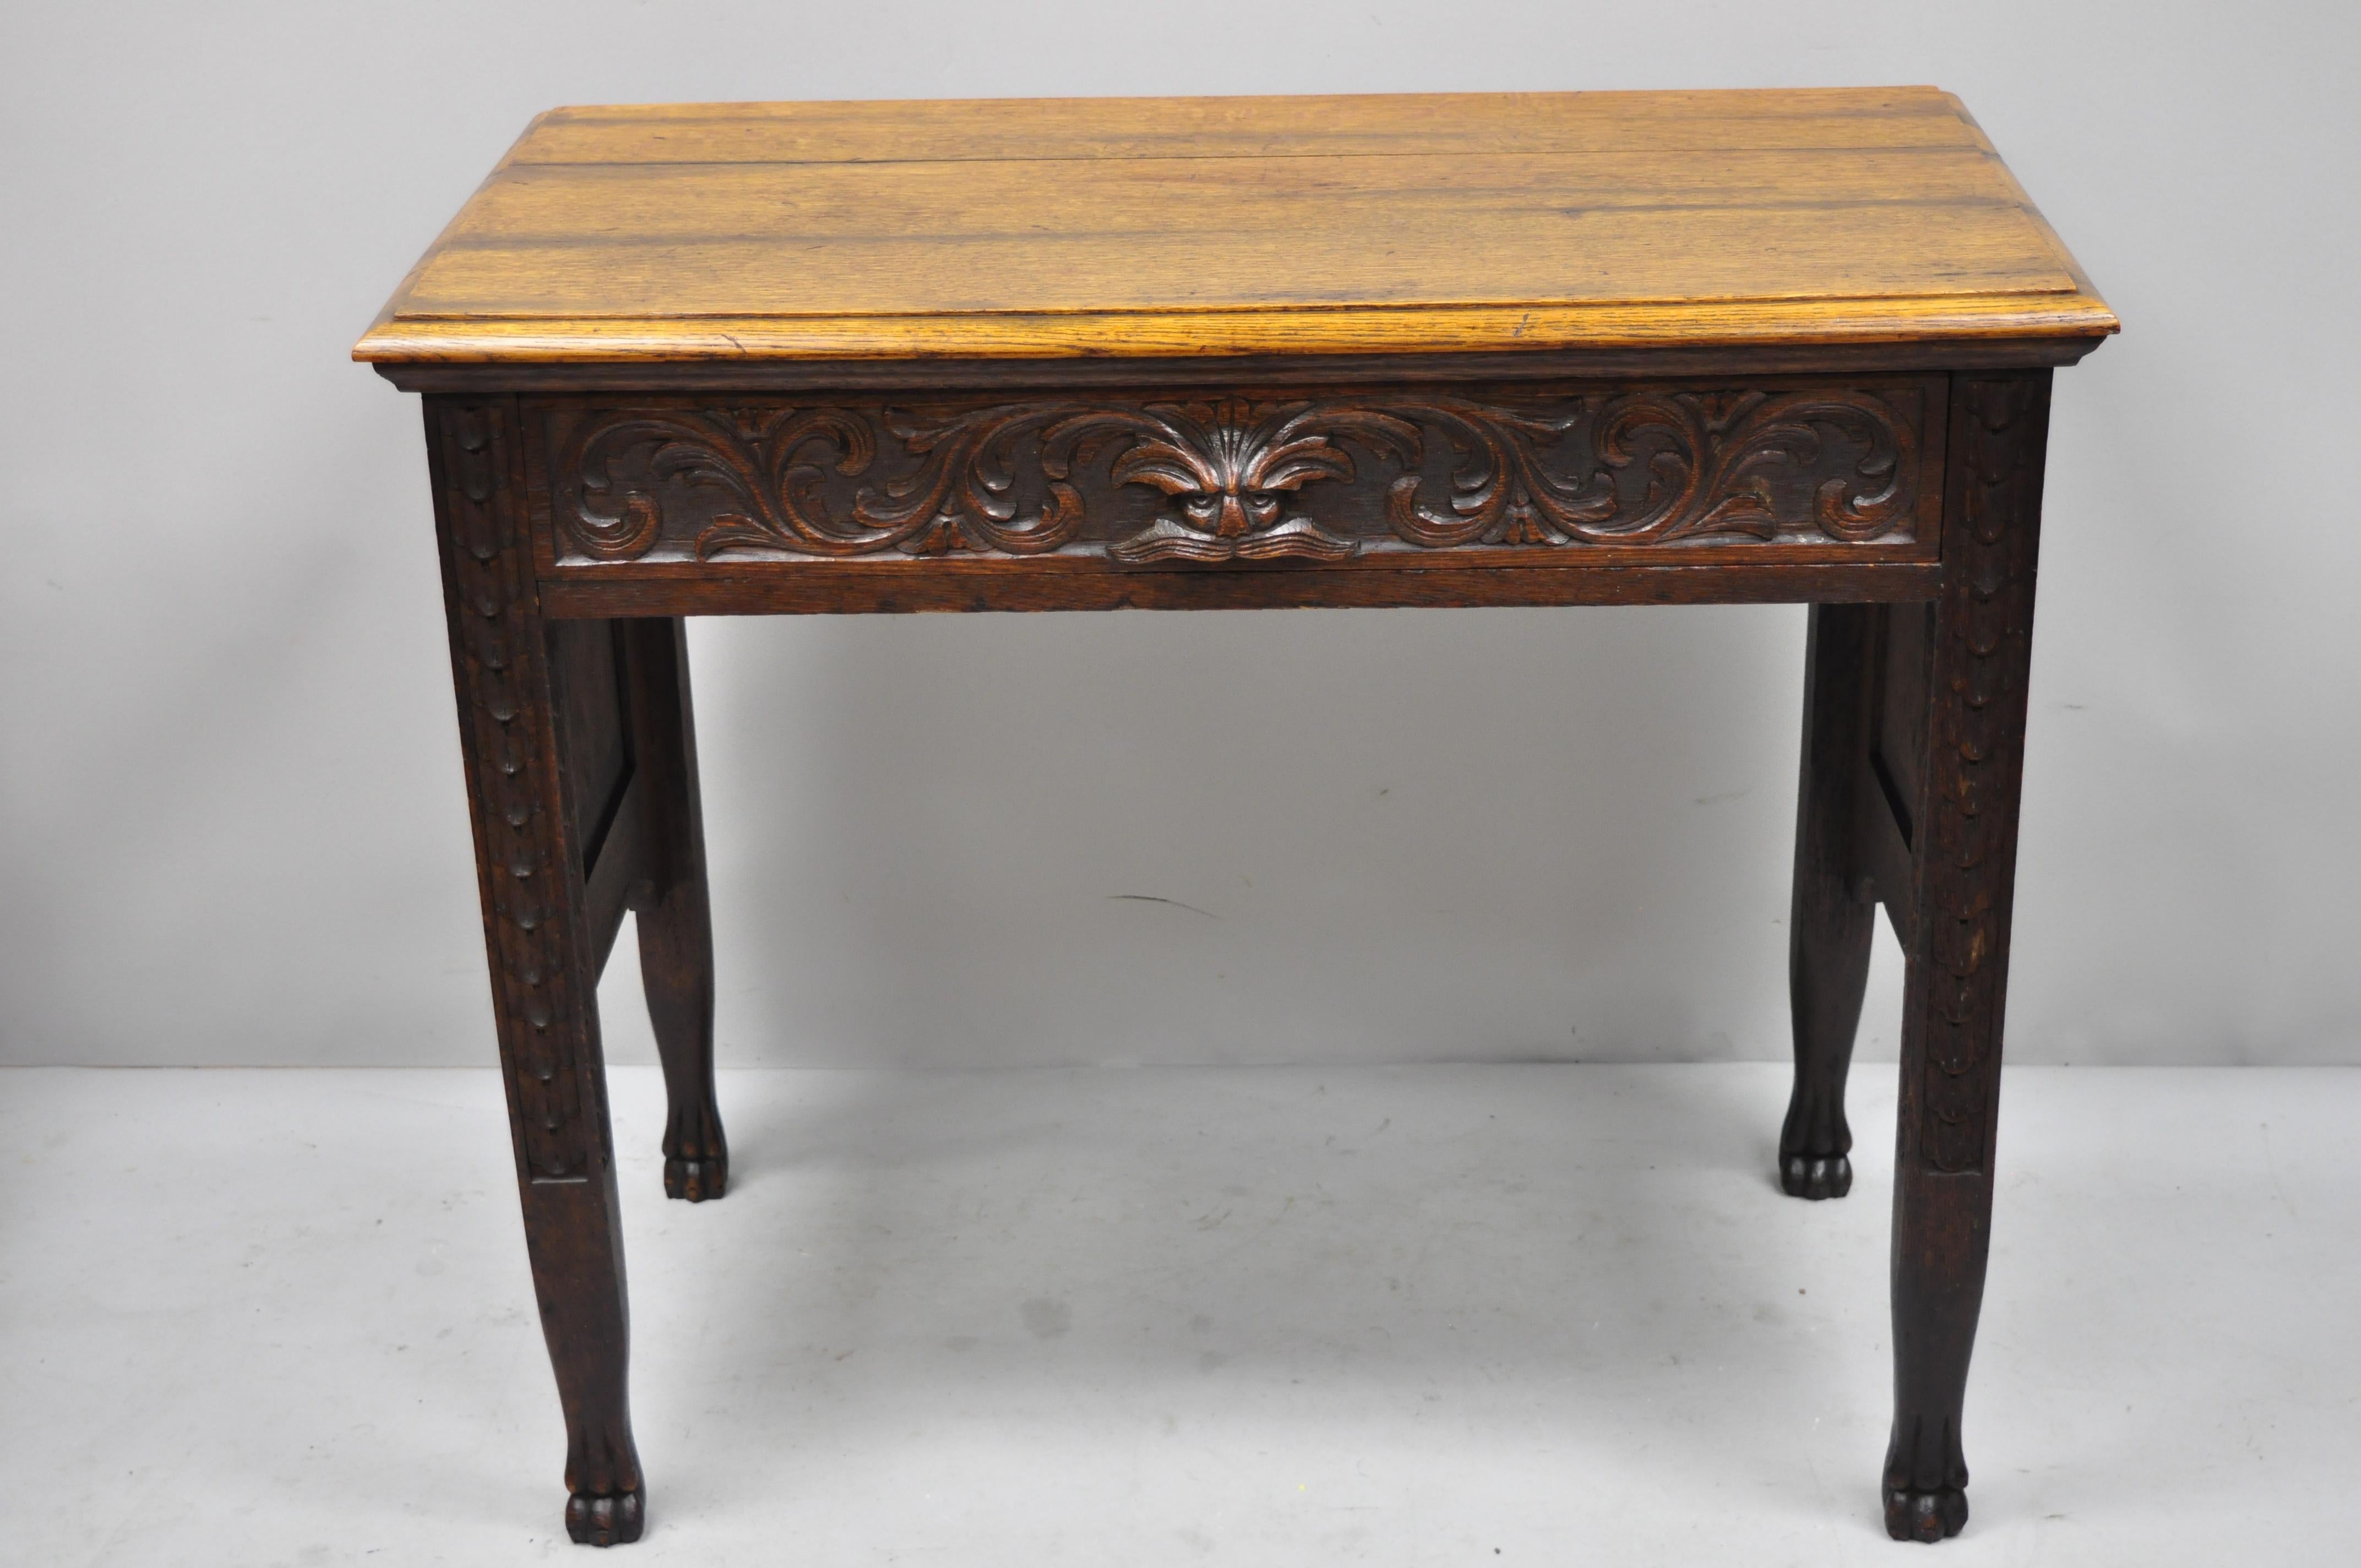 Antique black forest carved oak Jacobean mall writing desk table with Northwind face. Item features carved Northwind face drawer pull, hunter scenes to sides, paw feet, beautiful wood grain, finely carved details, 1 dovetailed drawer, circa late